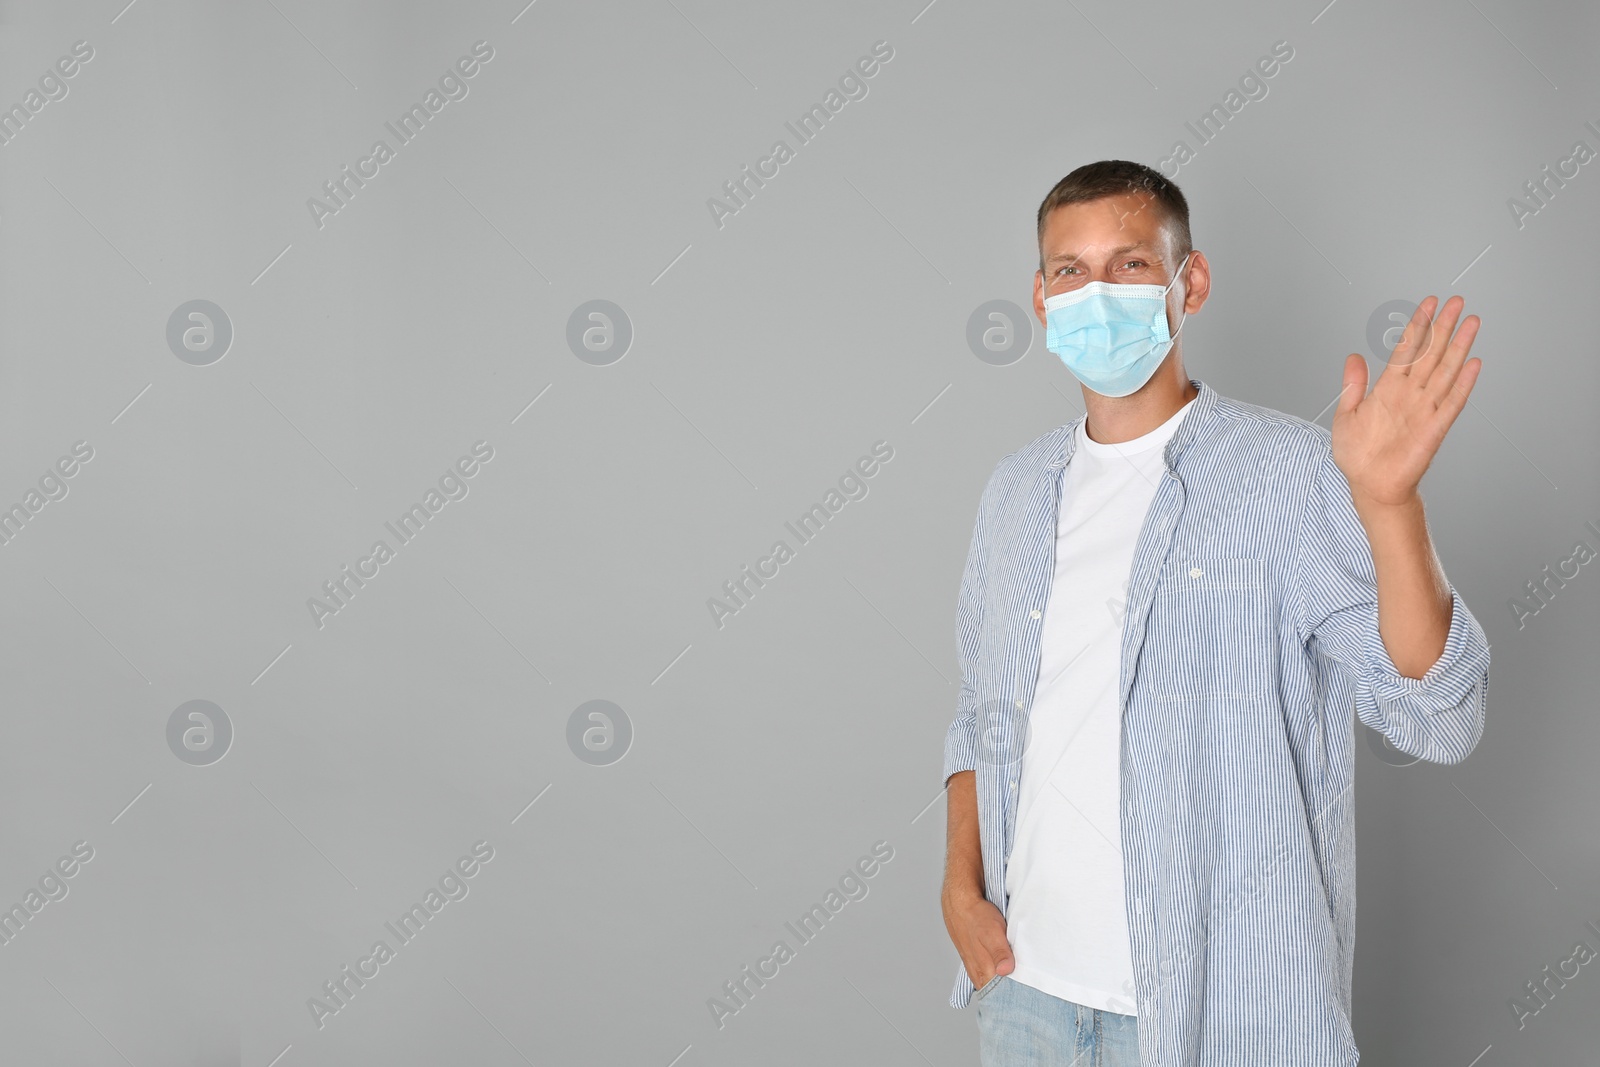 Photo of Man in protective mask showing hello gesture on grey background, space for text. Keeping social distance during coronavirus pandemic